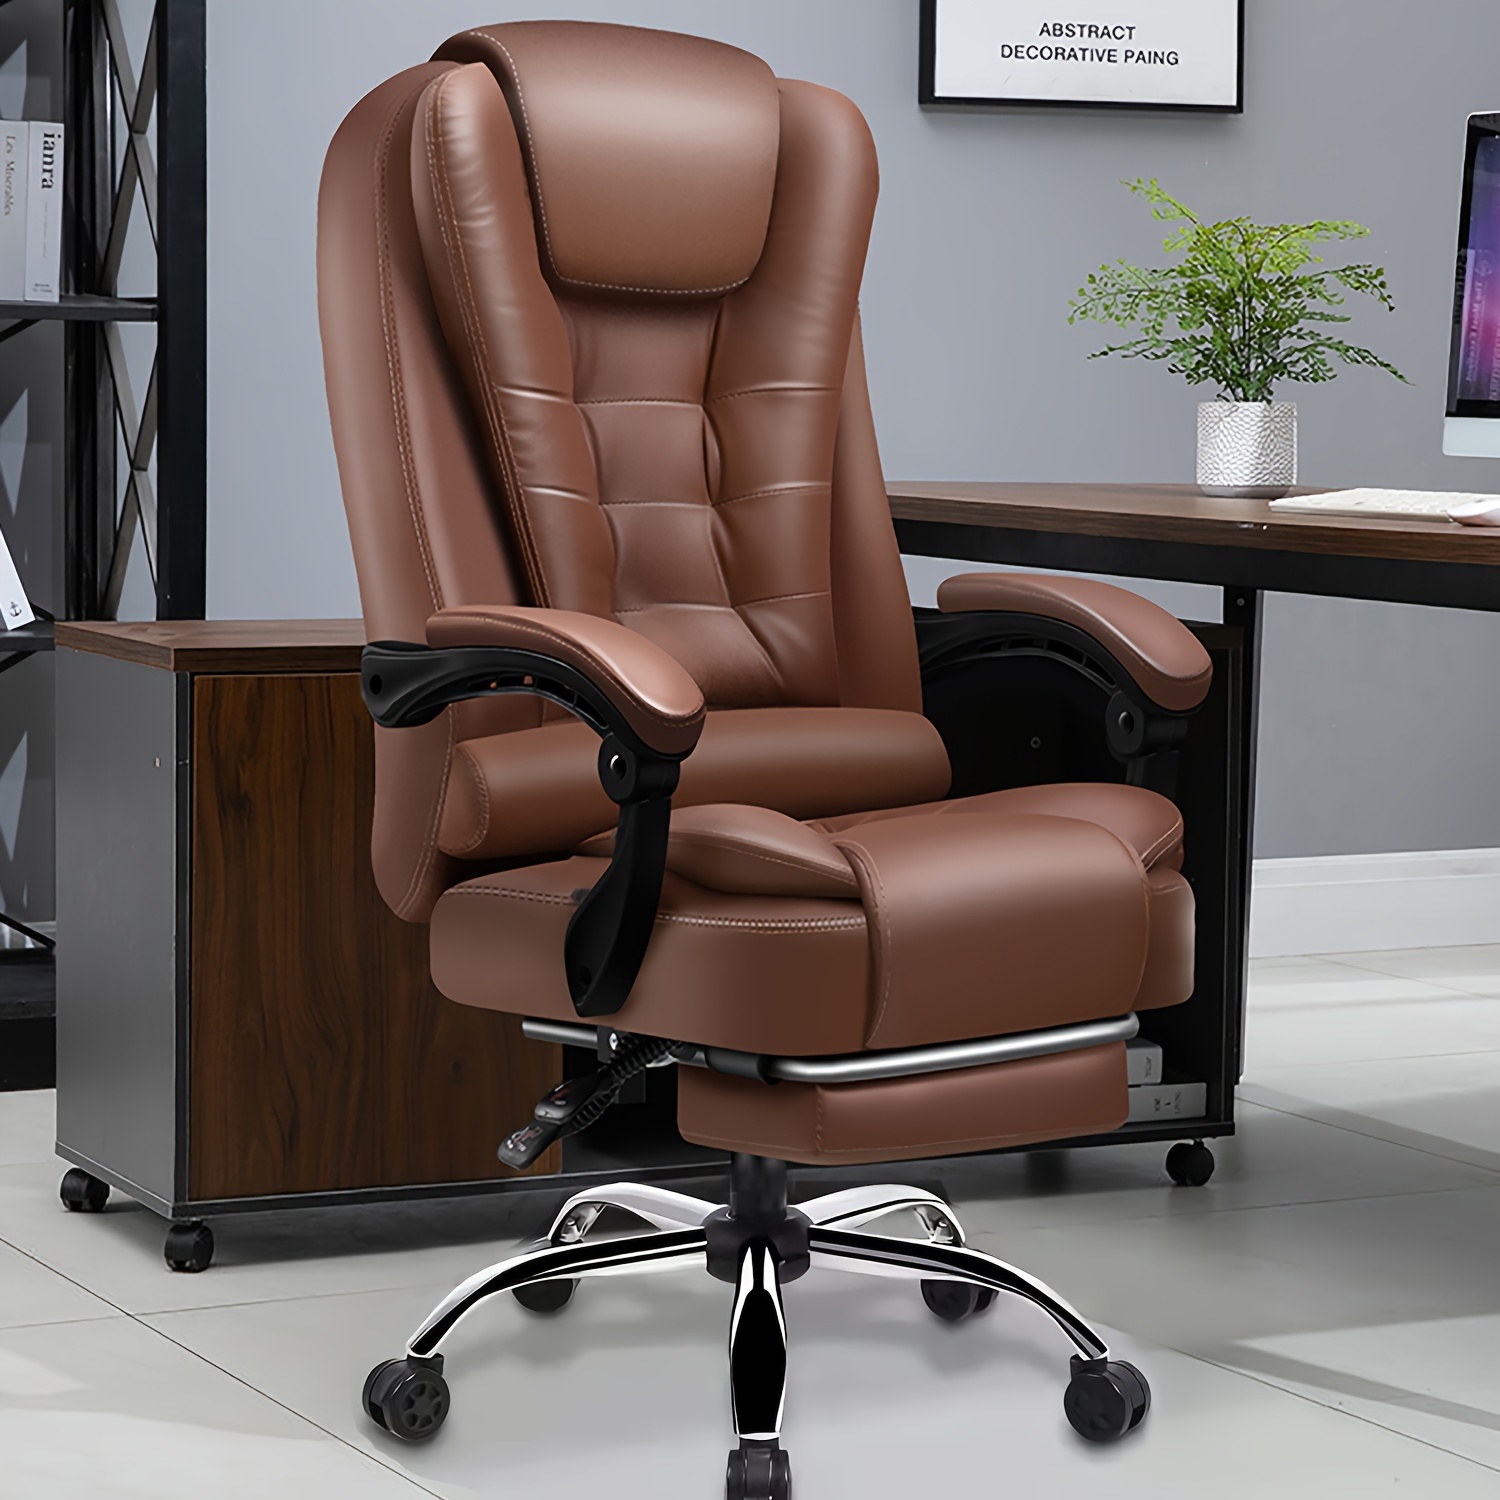 

Home Computer Chairs Office Gaming Chairs Big And Tall Desk Chair Back Support Computer Desk Chair Ergonomic High Back Chair Managerial Executive Office Desk Chair